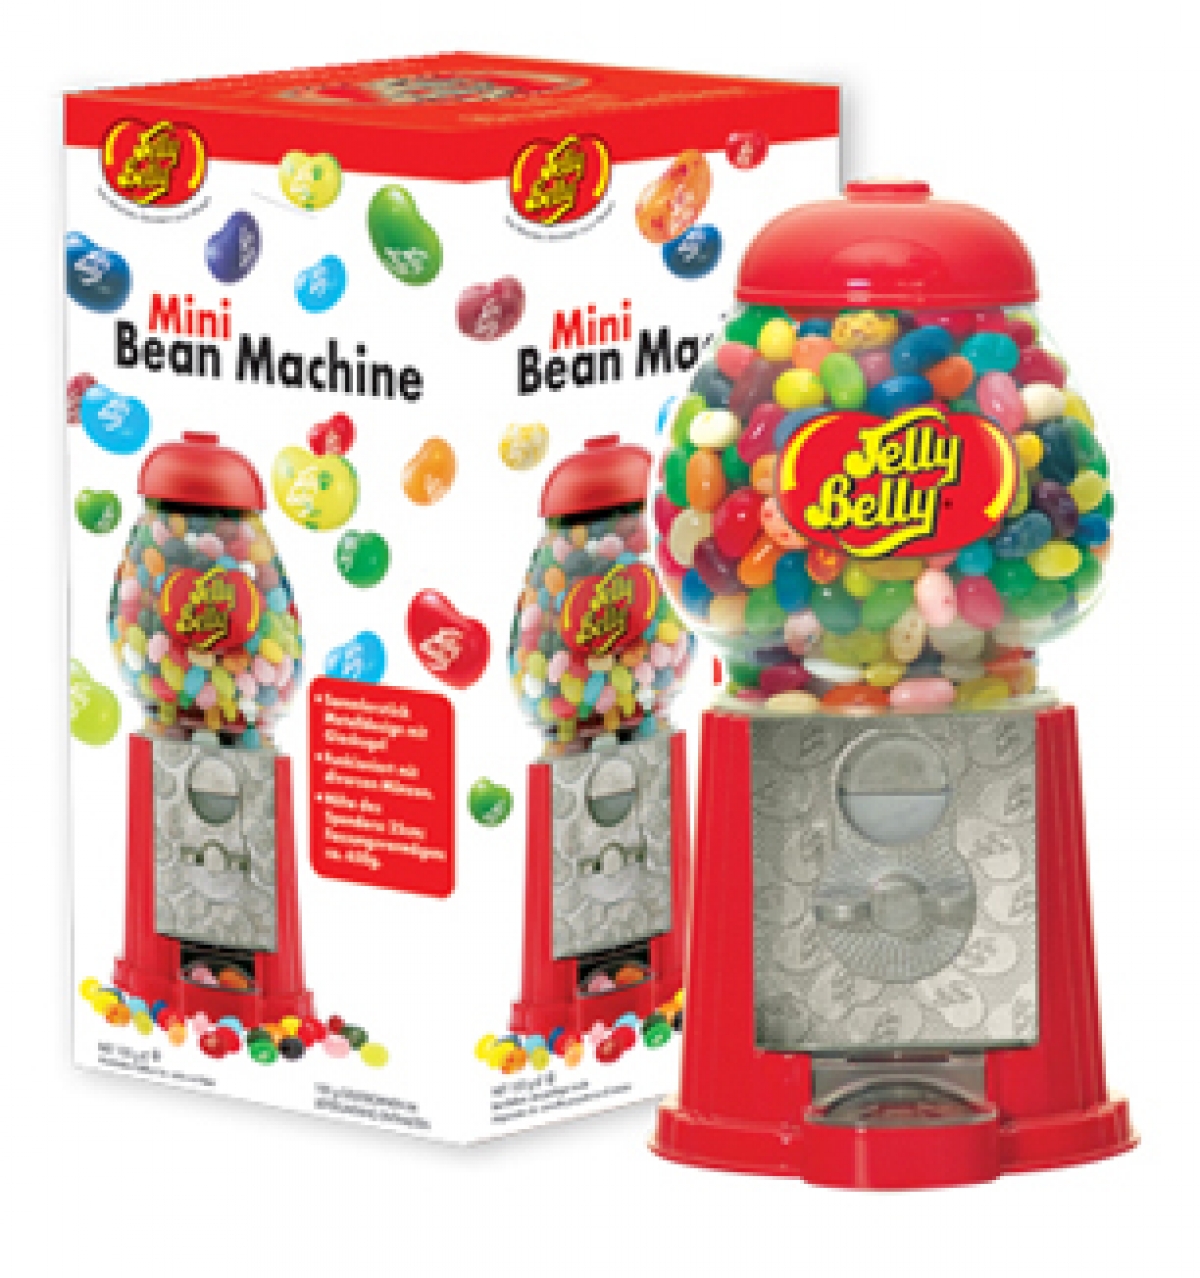 Jelly Belly Gifts and fun treats